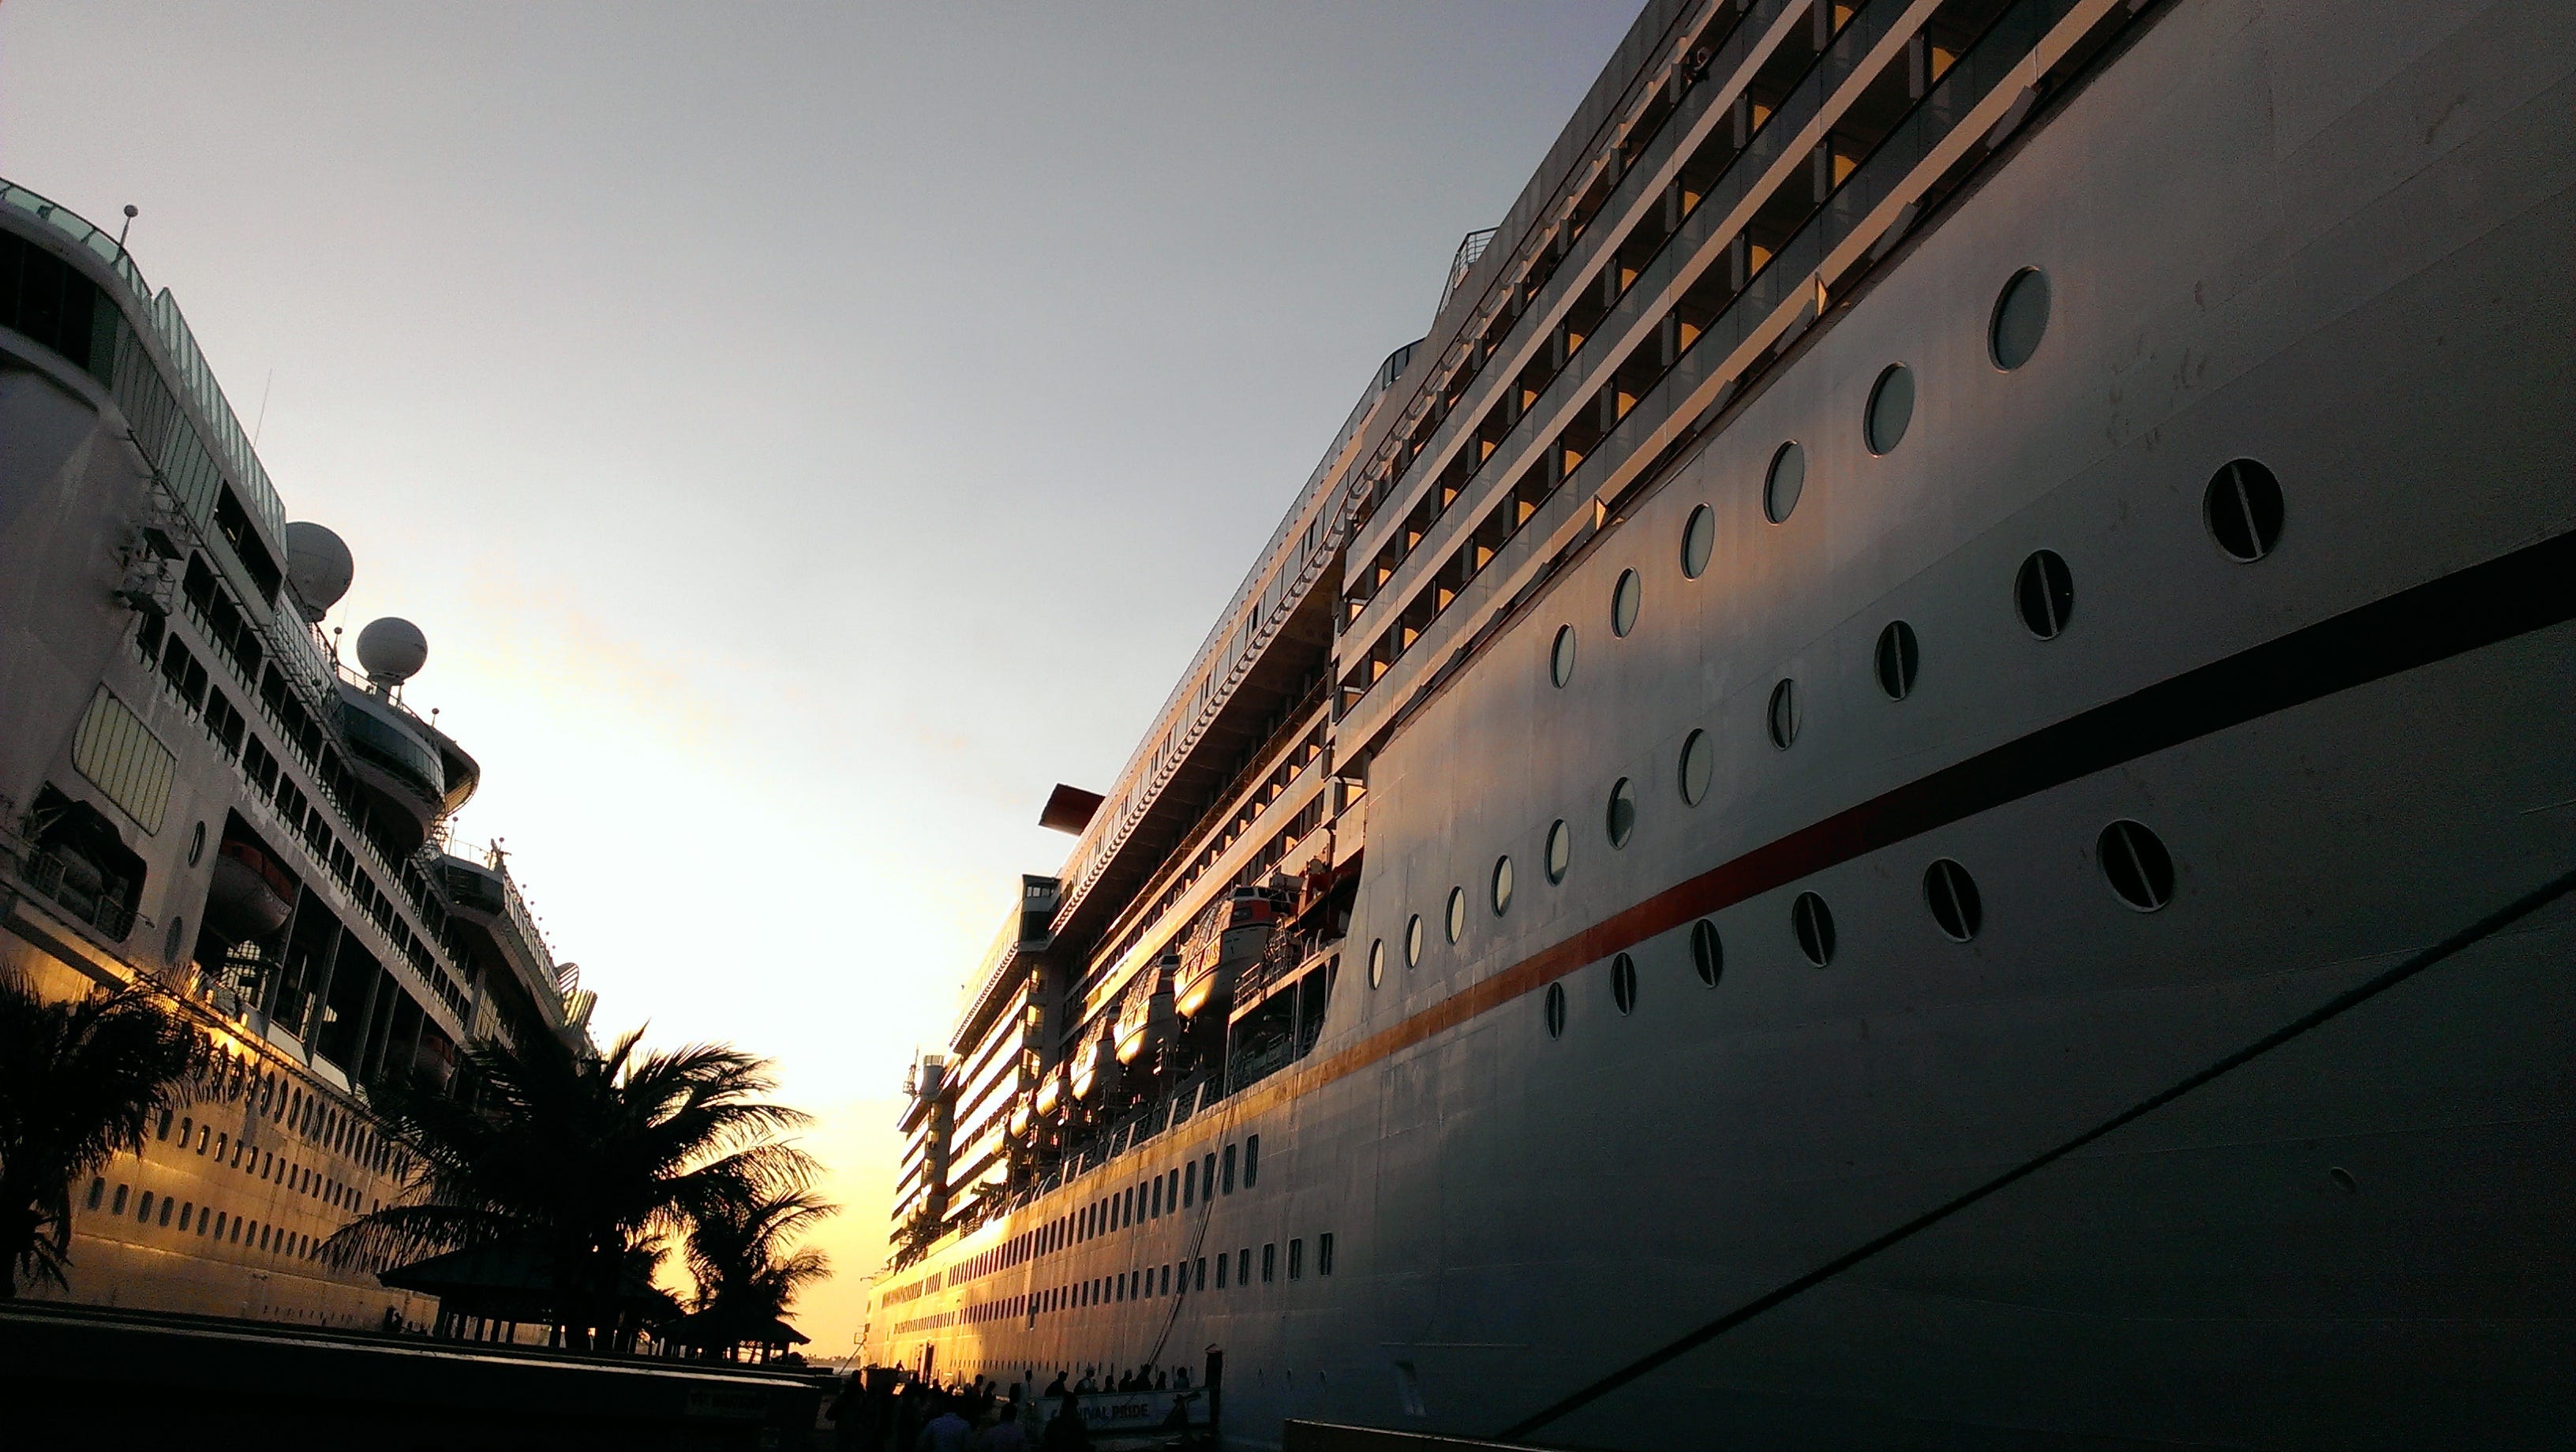 What's It Like to Work on a Cruise Ship?